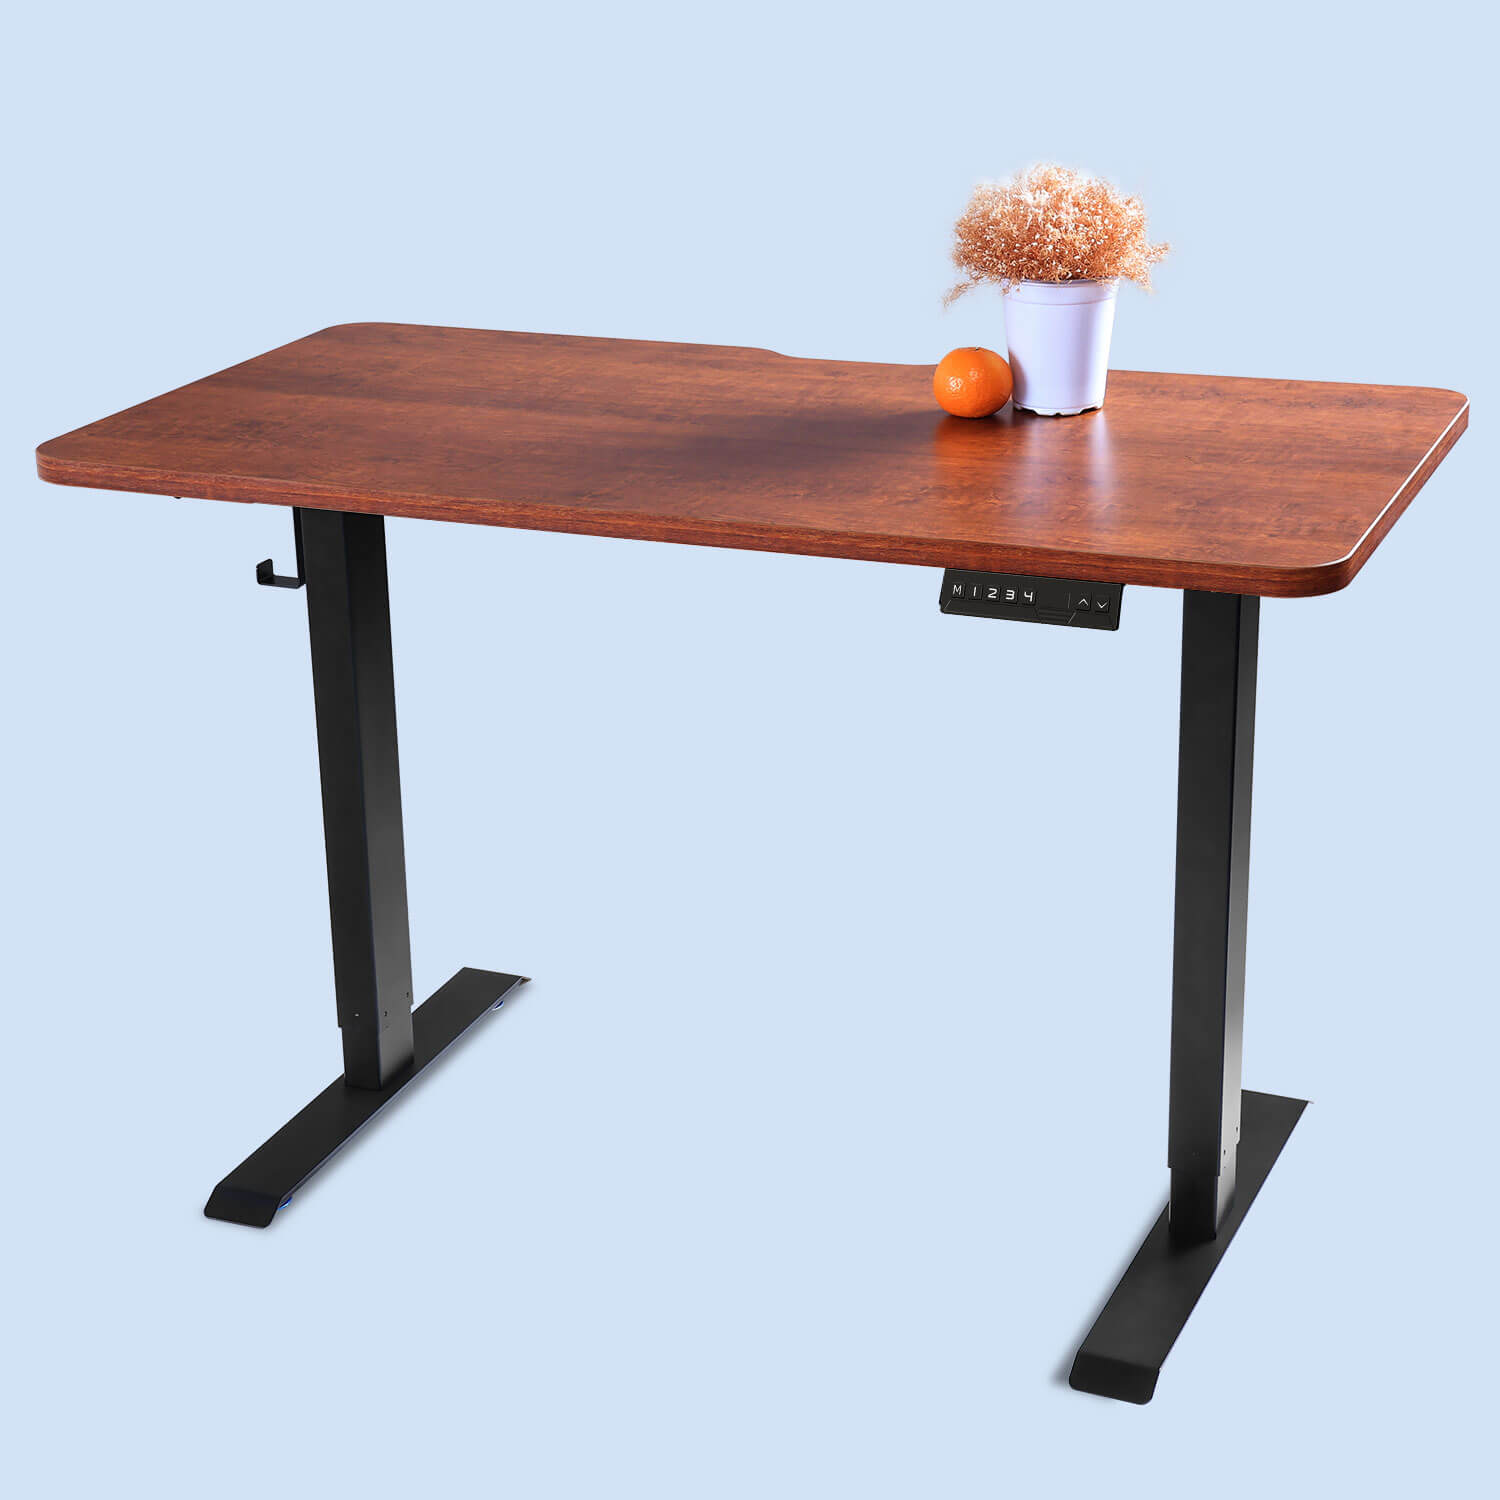 Mahogany electric standing desk for home office